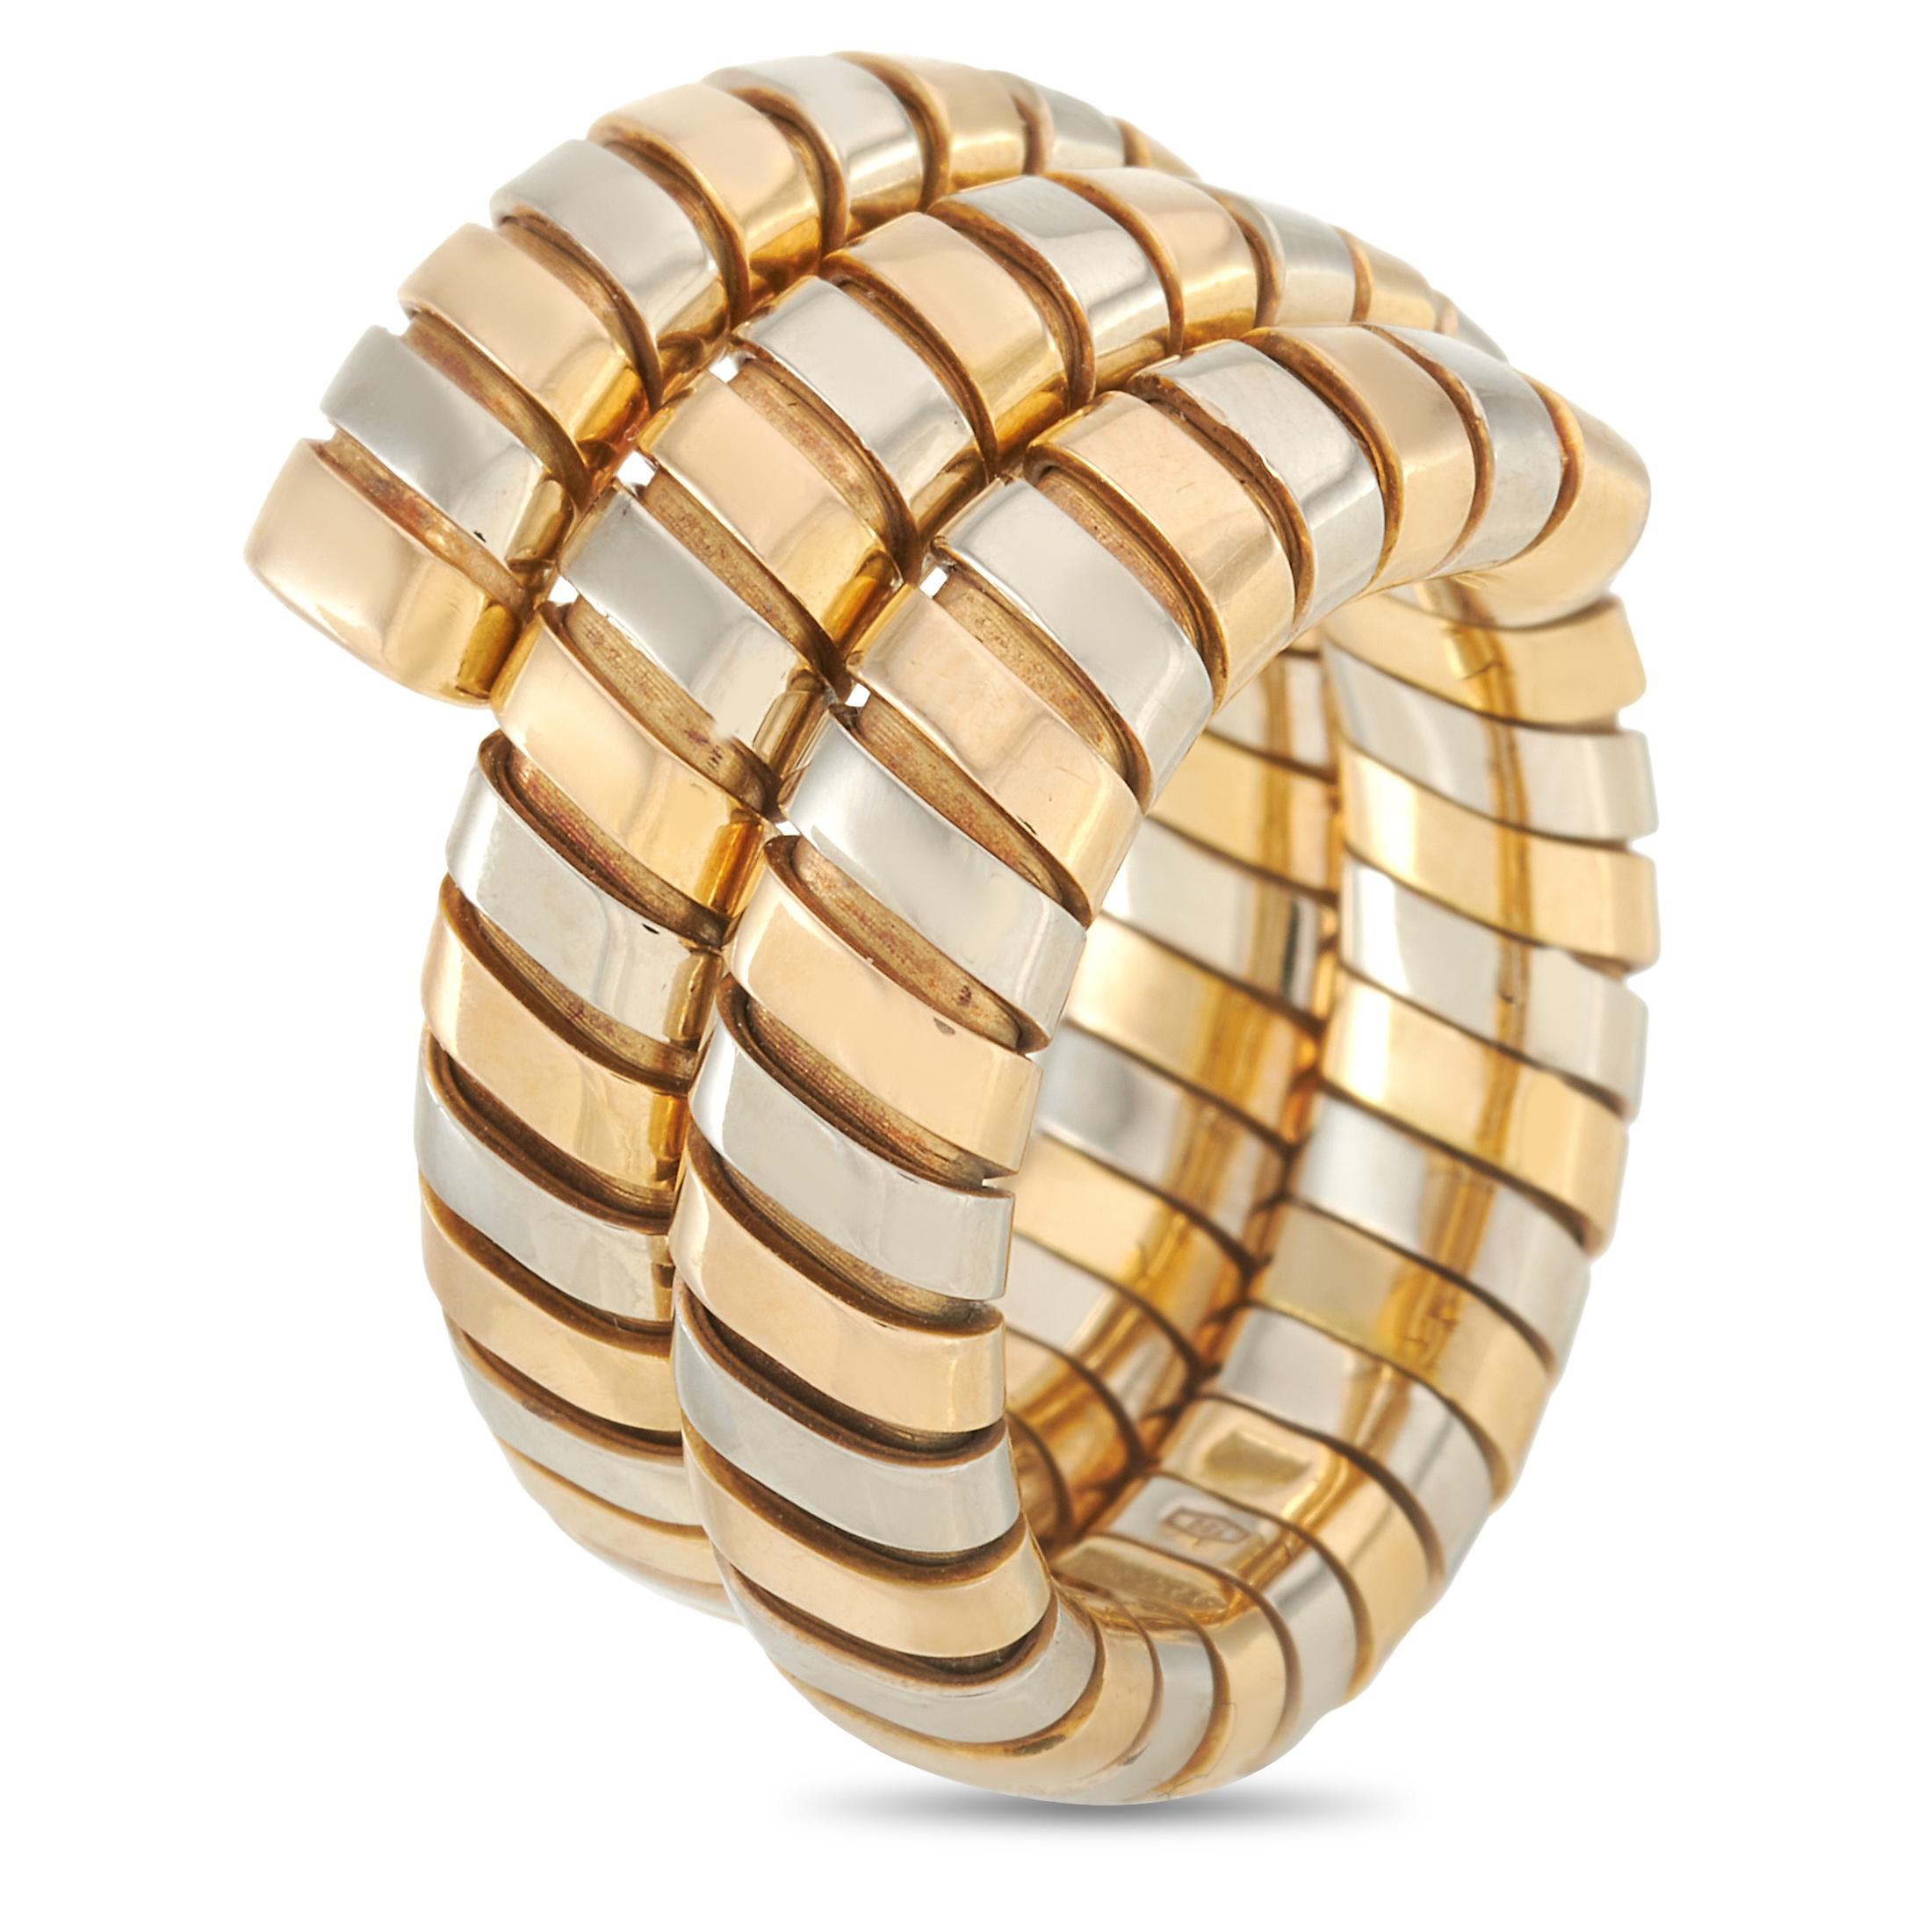 This Bvlgari tubogas ring is made out of 18K yellow and white gold. It weighs 18.7 grams and boasts band thickness of 15 mm.
 
 The ring is offered in estate condition and includes the manufacturer’s box.